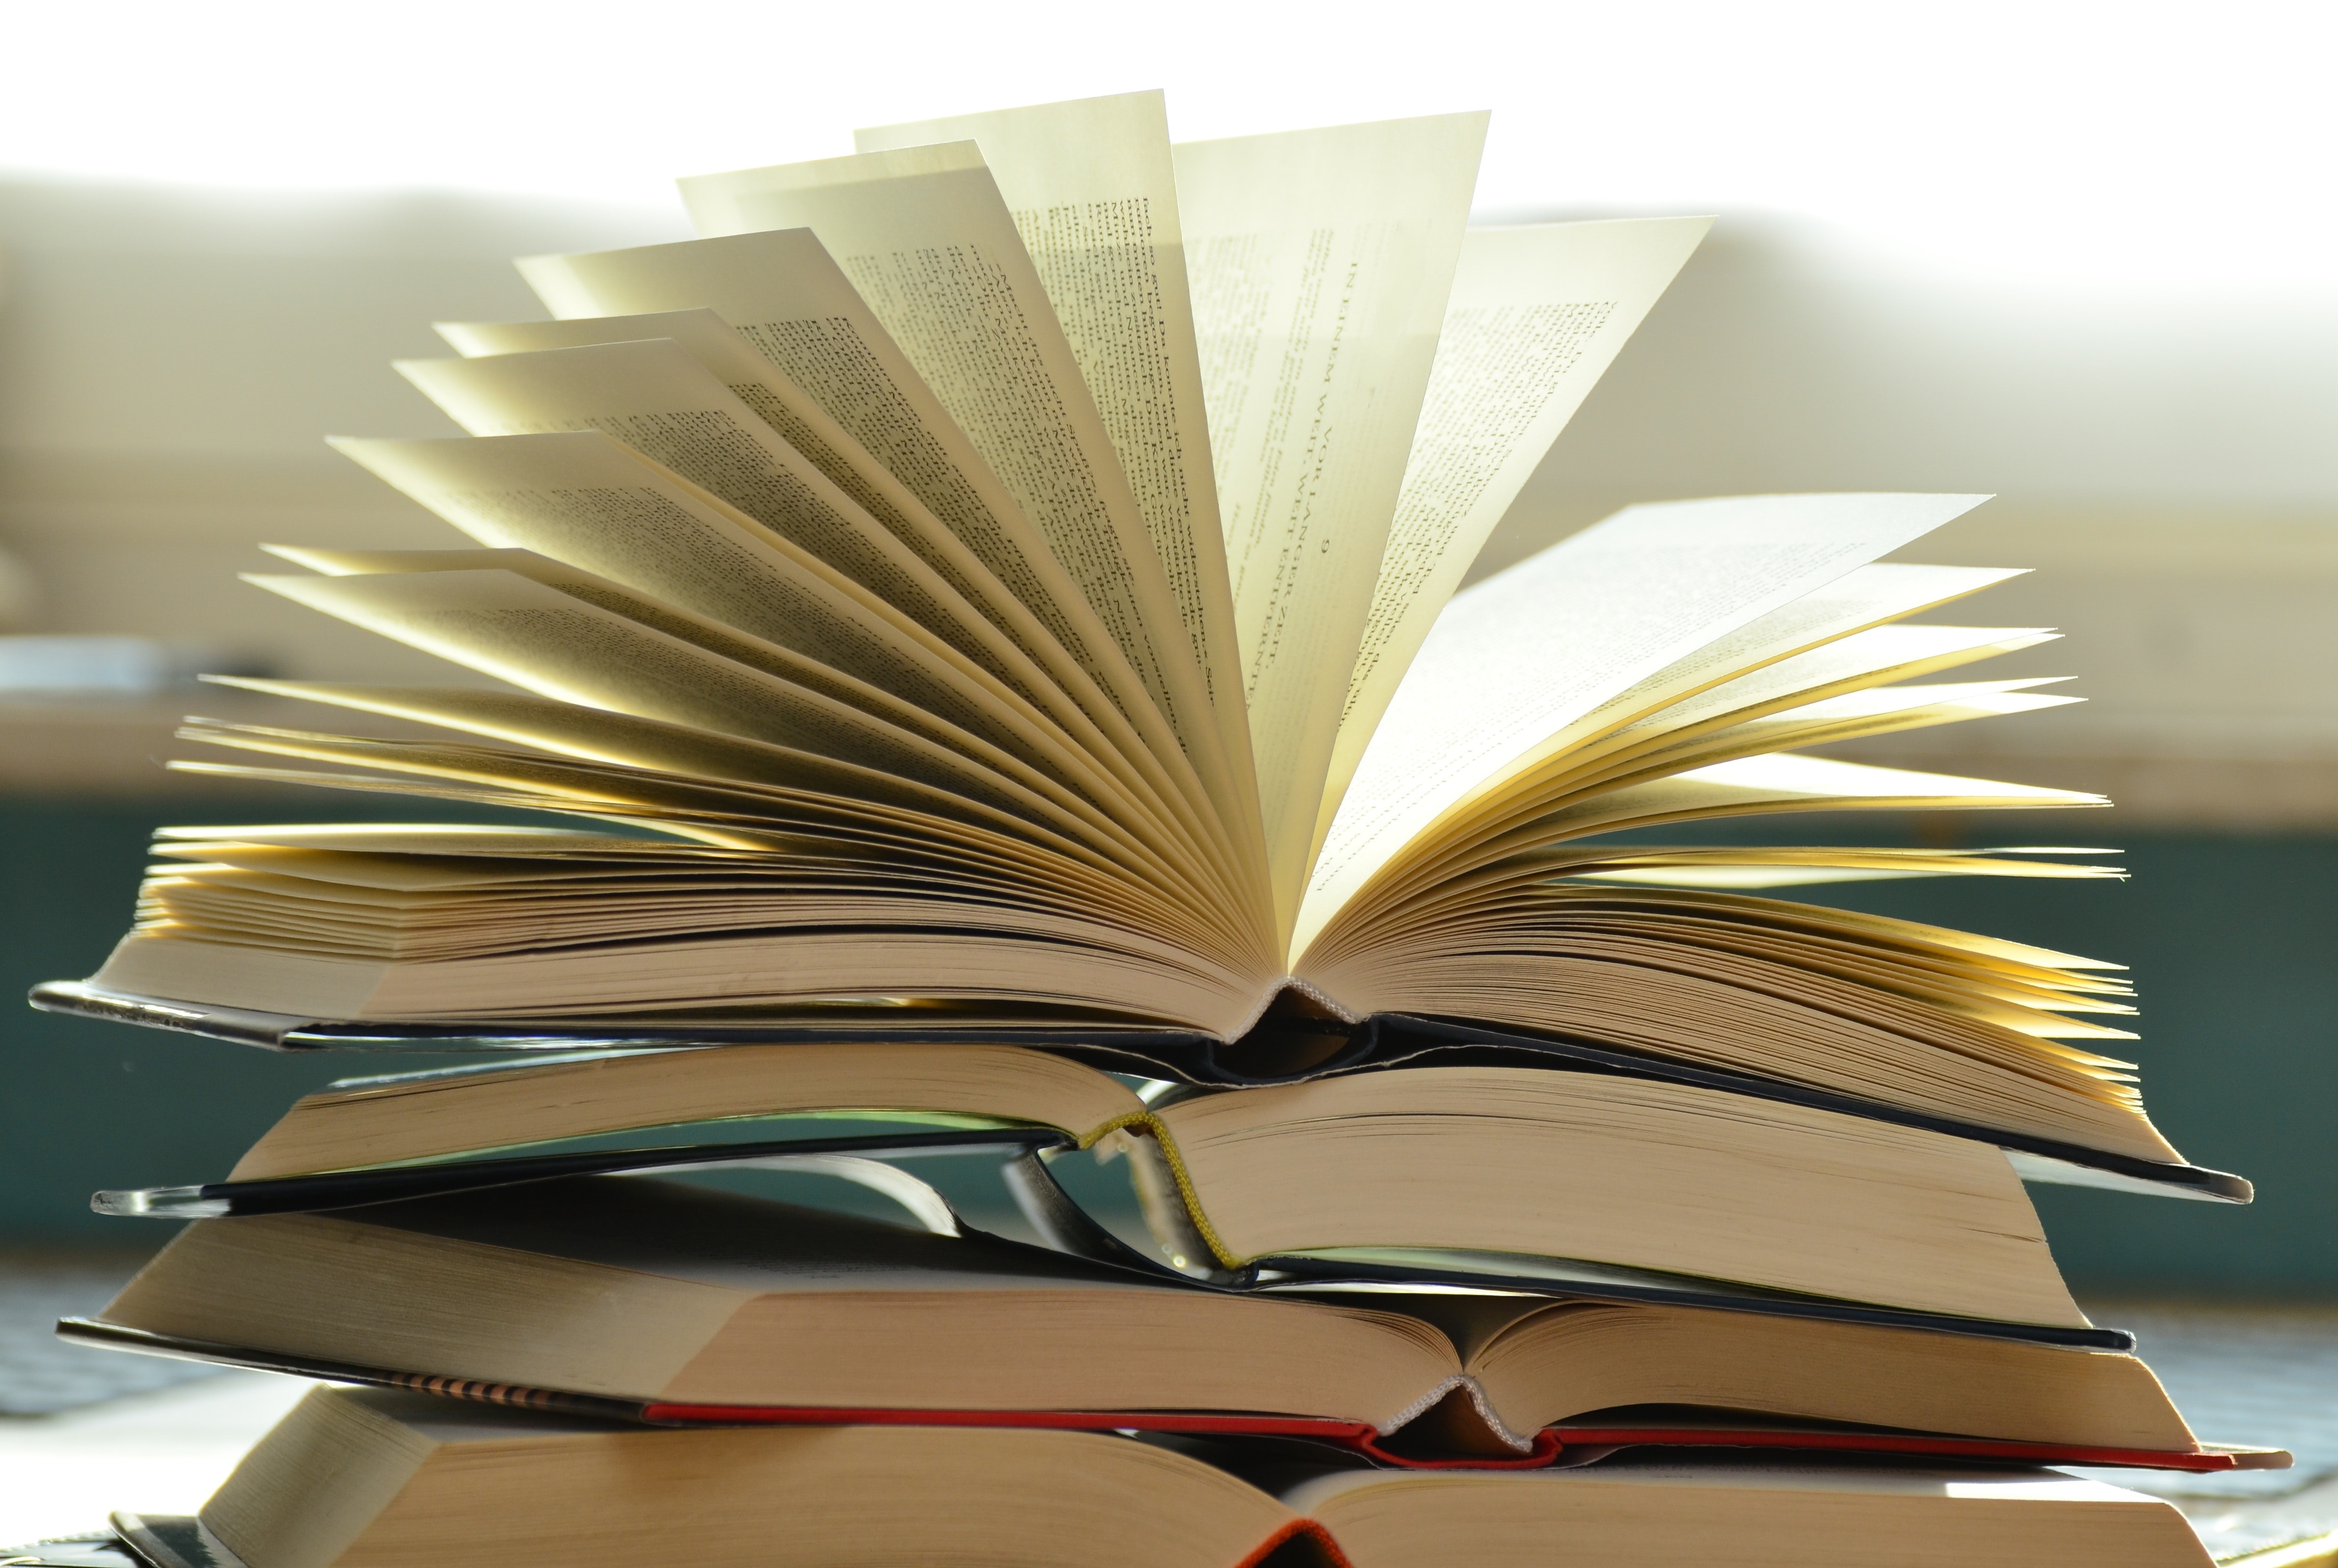 A stack of open books with a blurred background. Photo from Pixabay via Pexels.com.